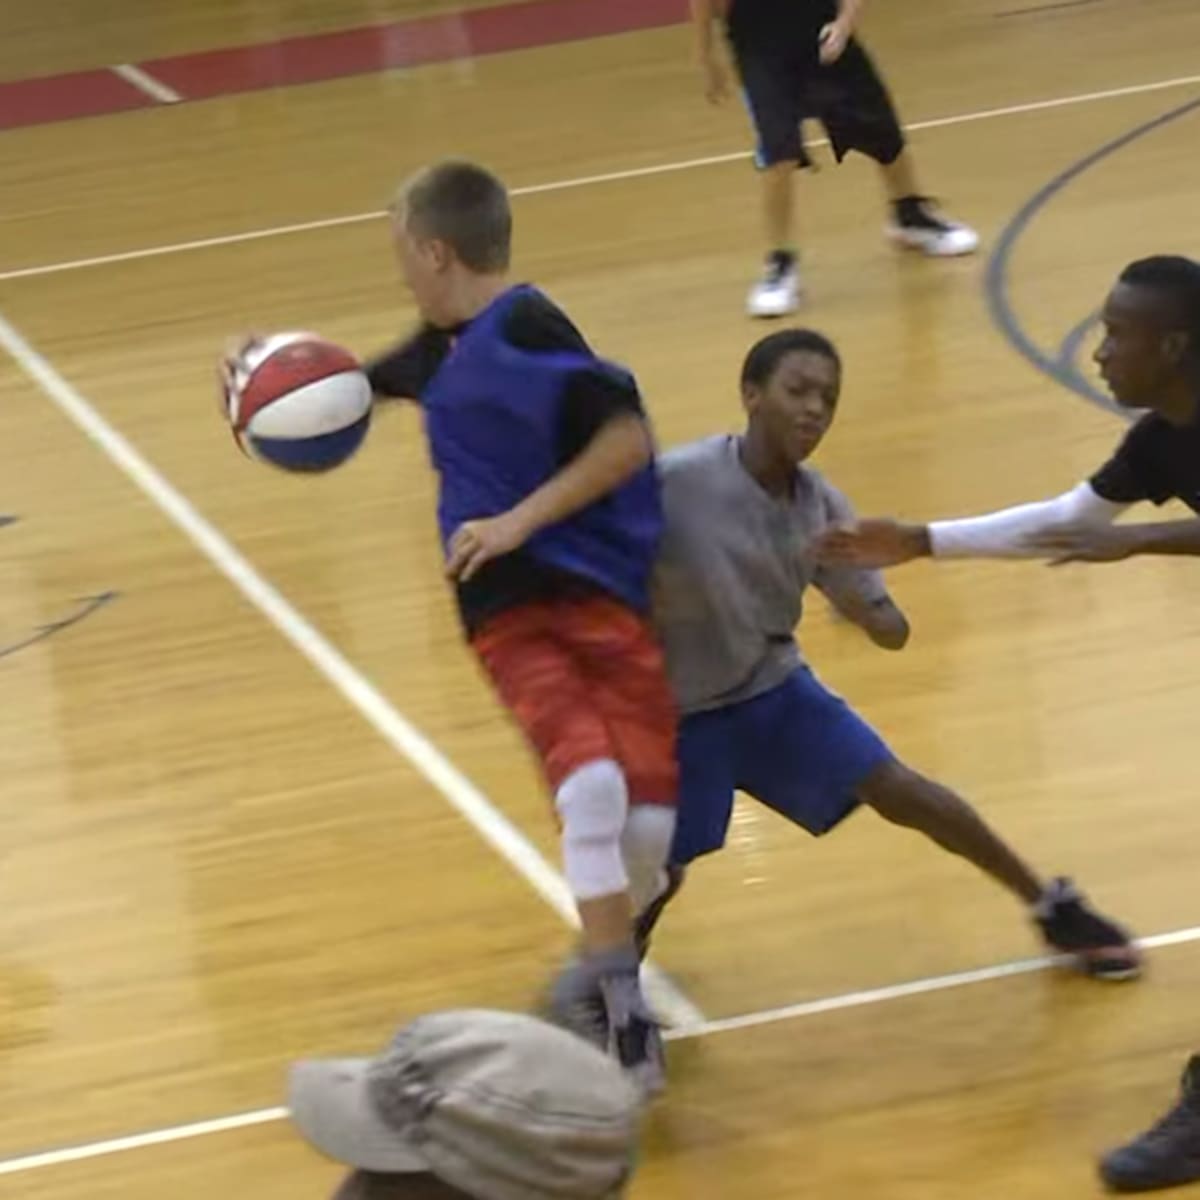 Jason 'White Chocolate' Williams' 13-Year-Old Son Takes After His